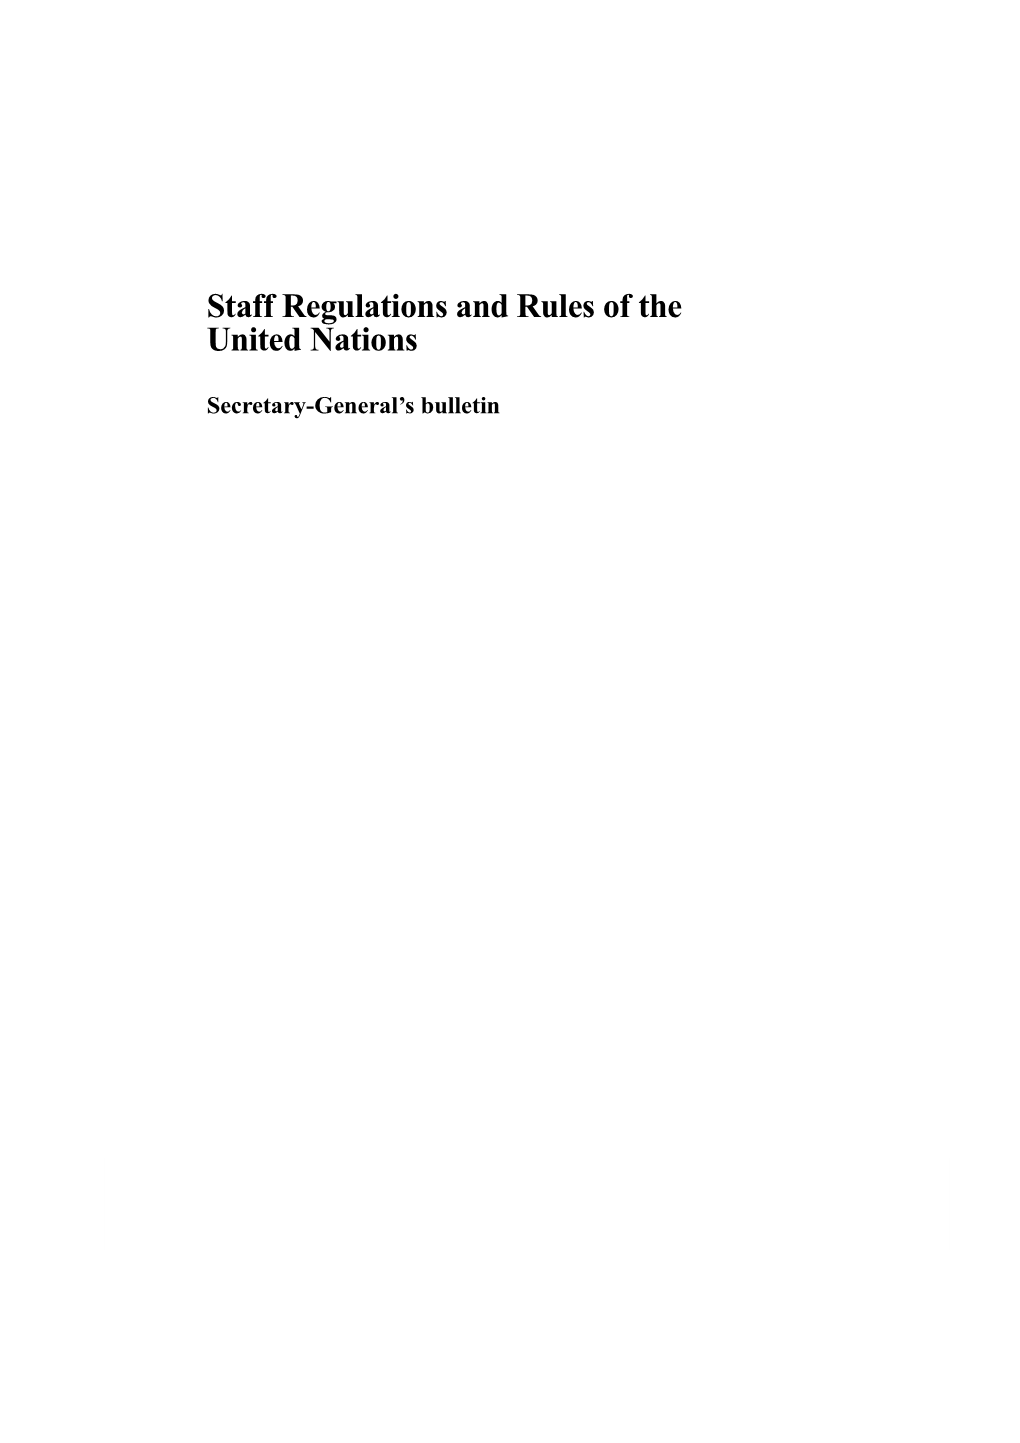 Staff Regulations and Rules of the United Nations